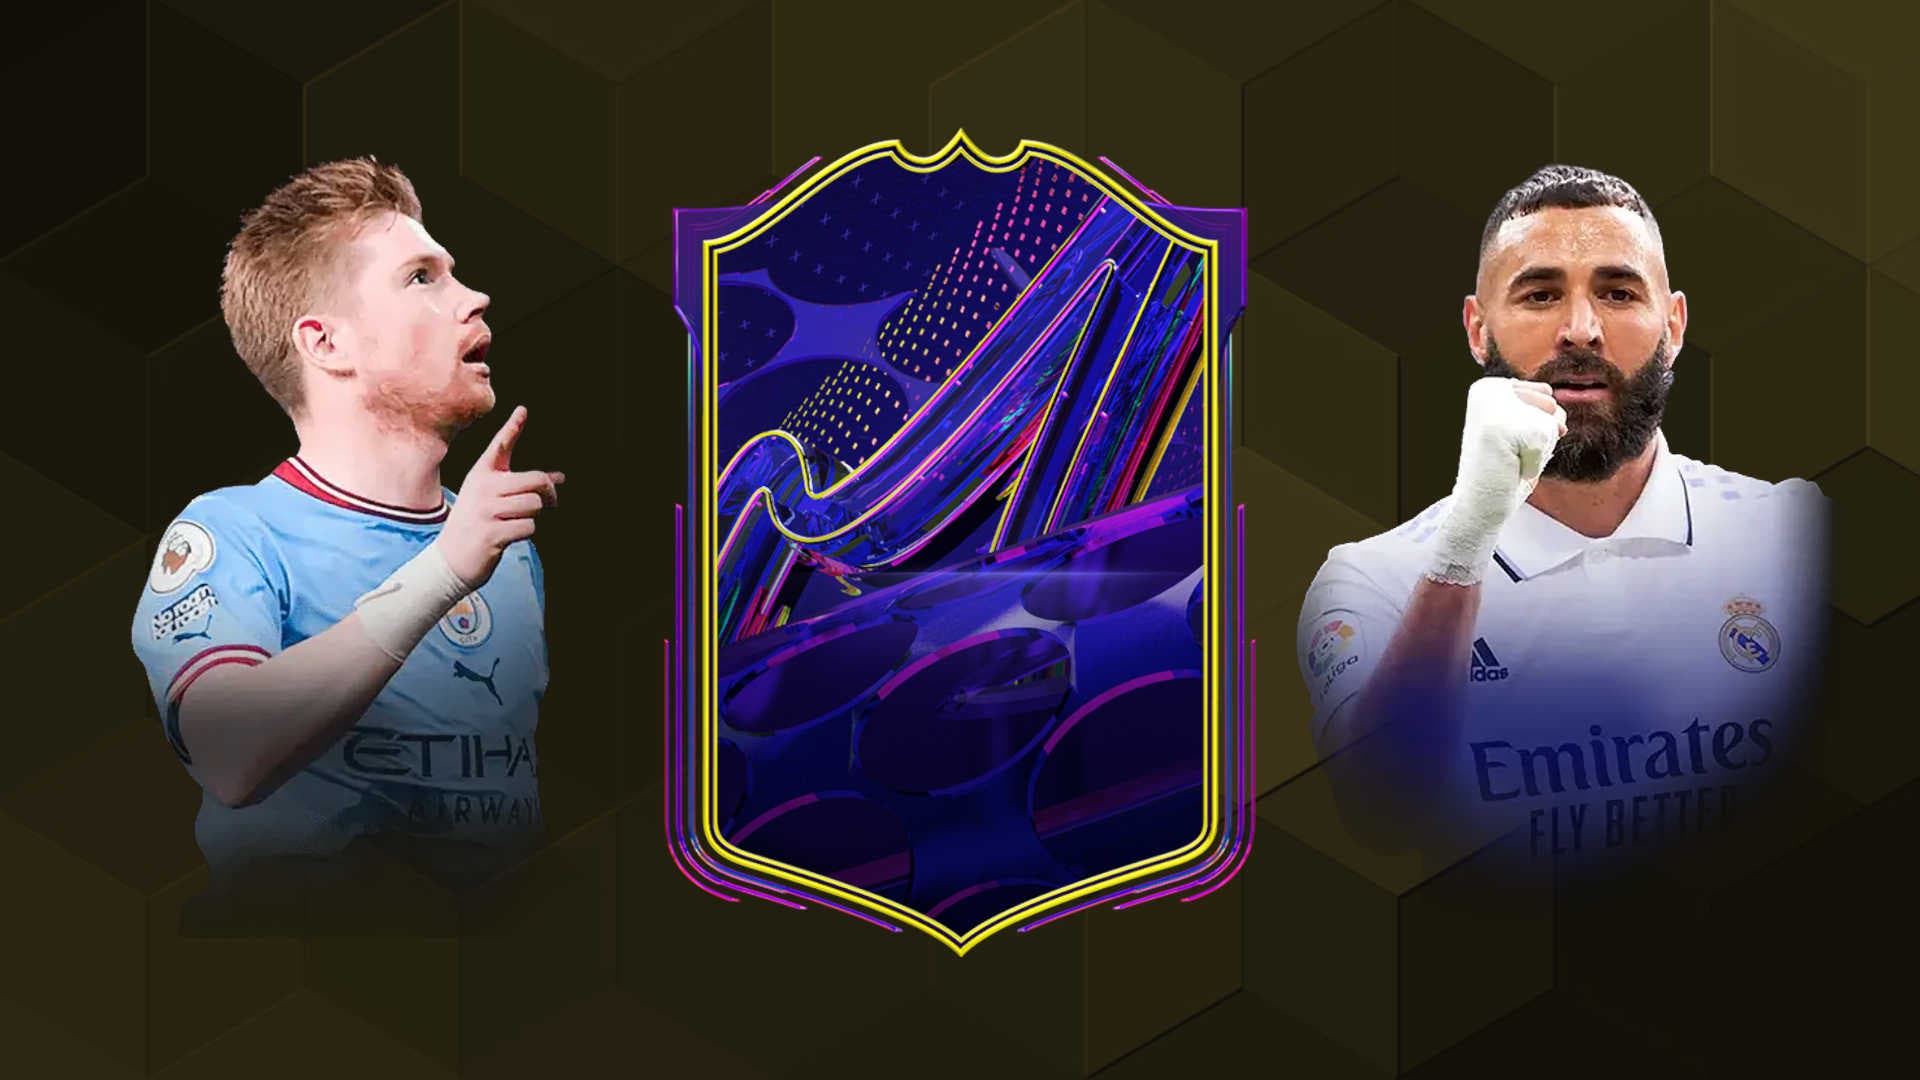 FIFA 23: TOTW 23 features multiple OTW players and lots of high averages